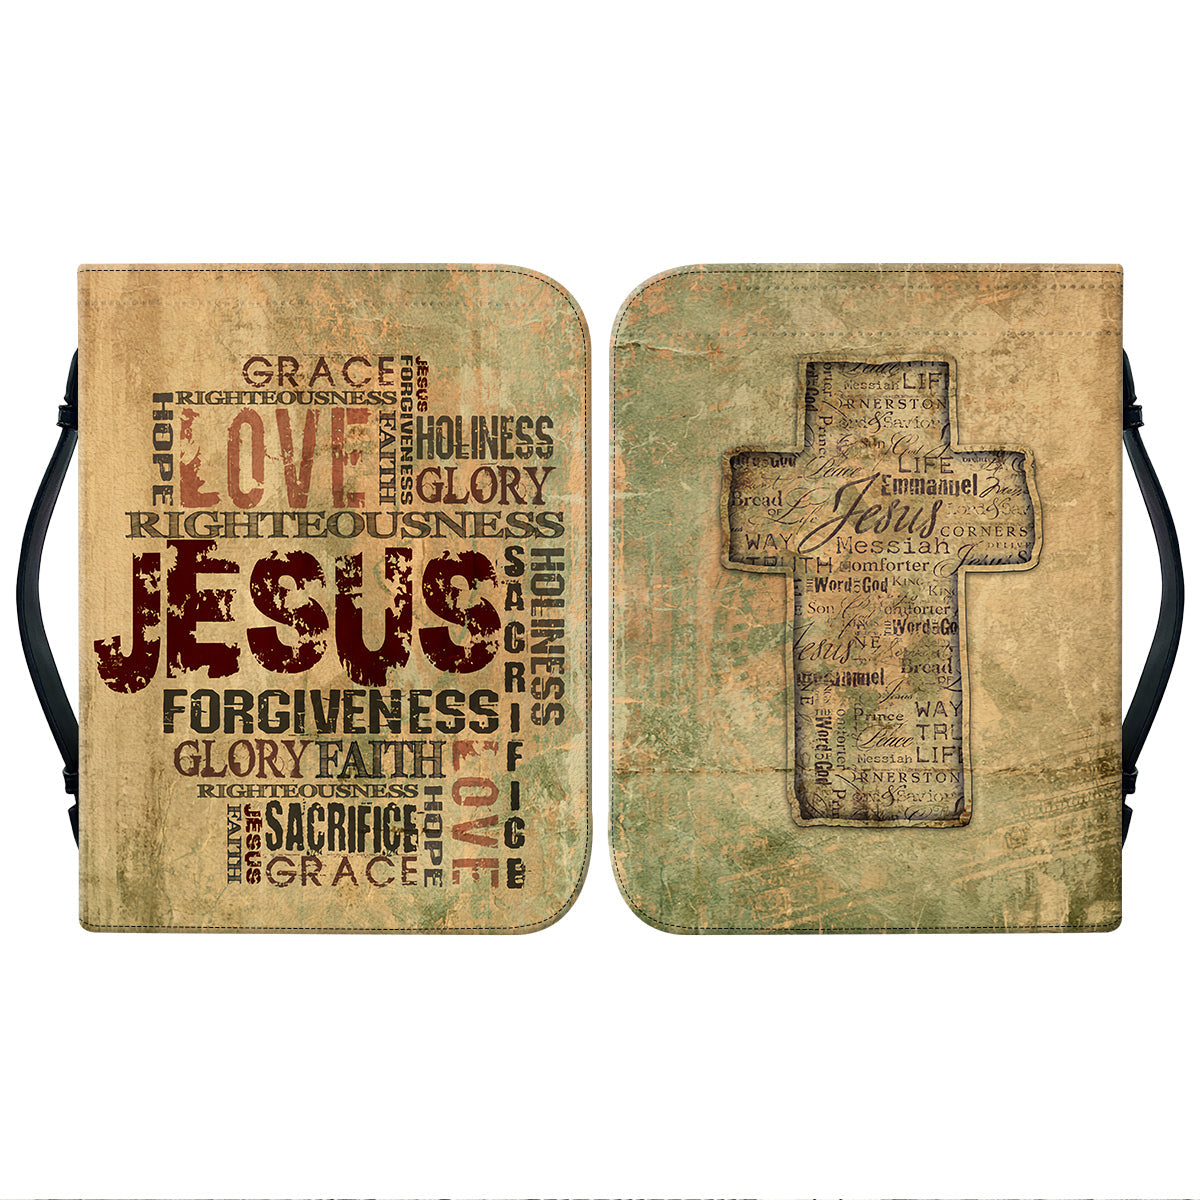 Teesdily | Customized Jesus Leather Bible Case, Jesus Words Bible Study, Religious Bible Carrier, Christian Bible Holder, Jesus Believer Gifts